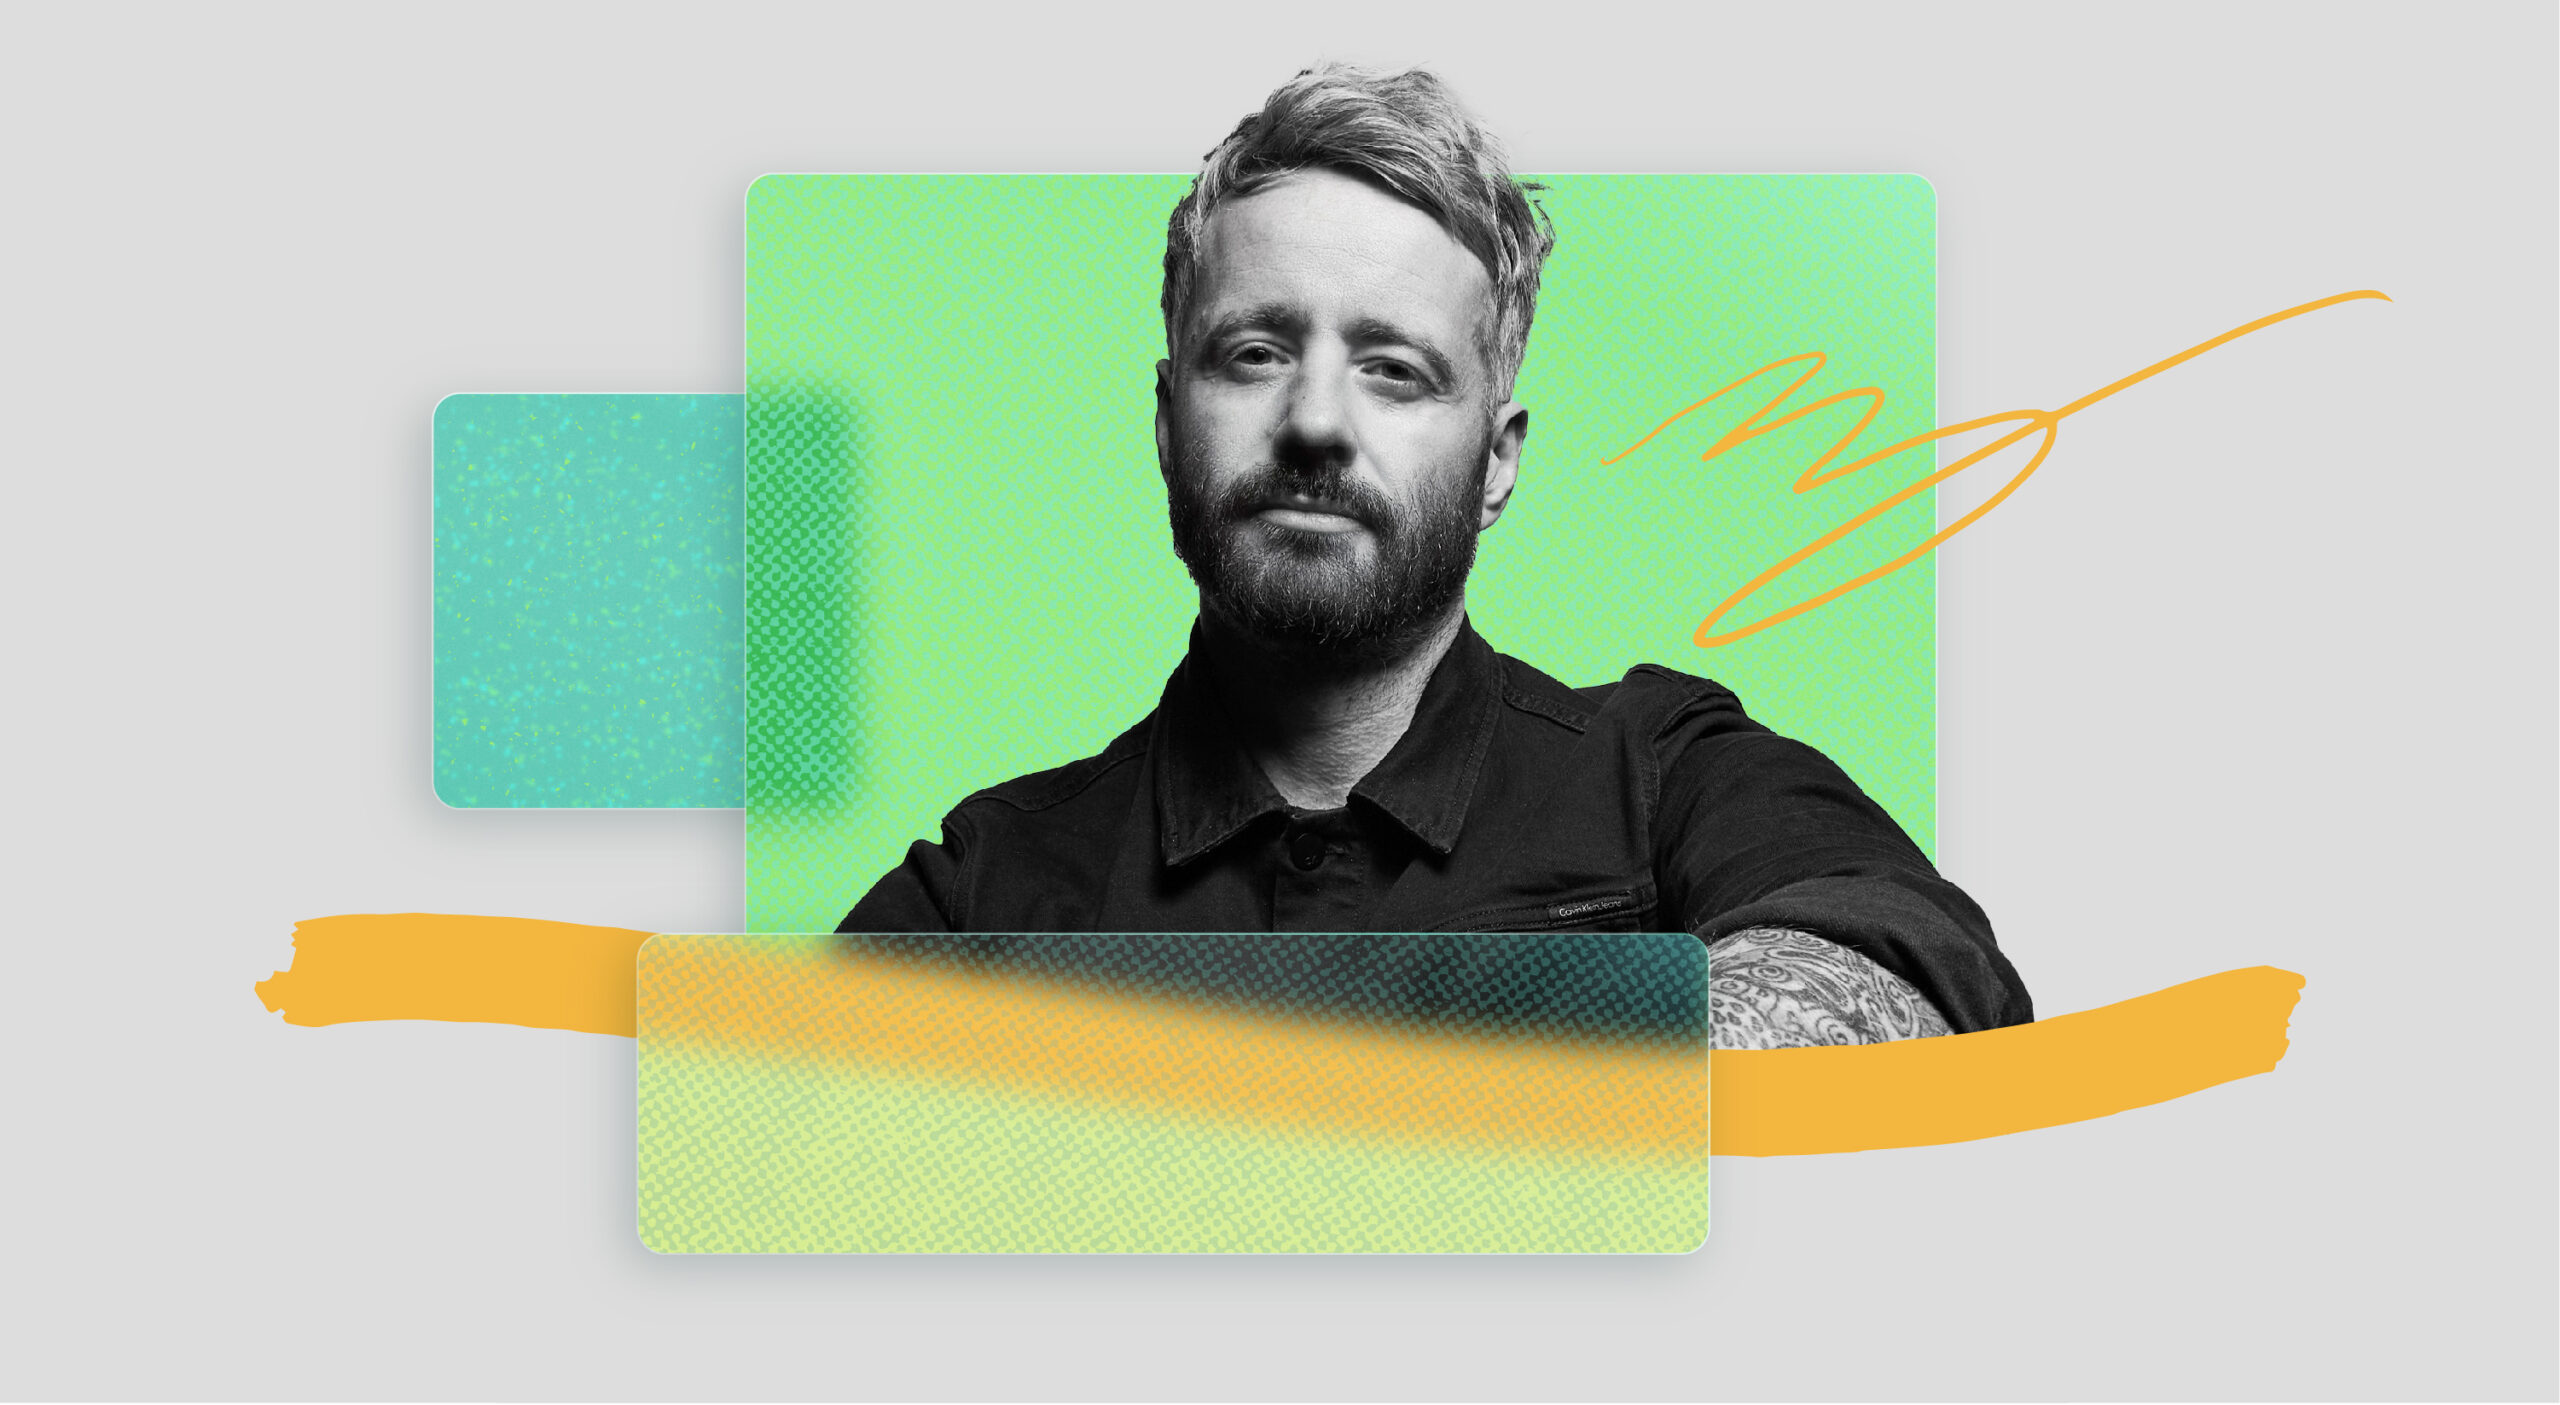 A photograph of James Thomas, the global head of technology at Dentsu Creative, on a colorful treated background